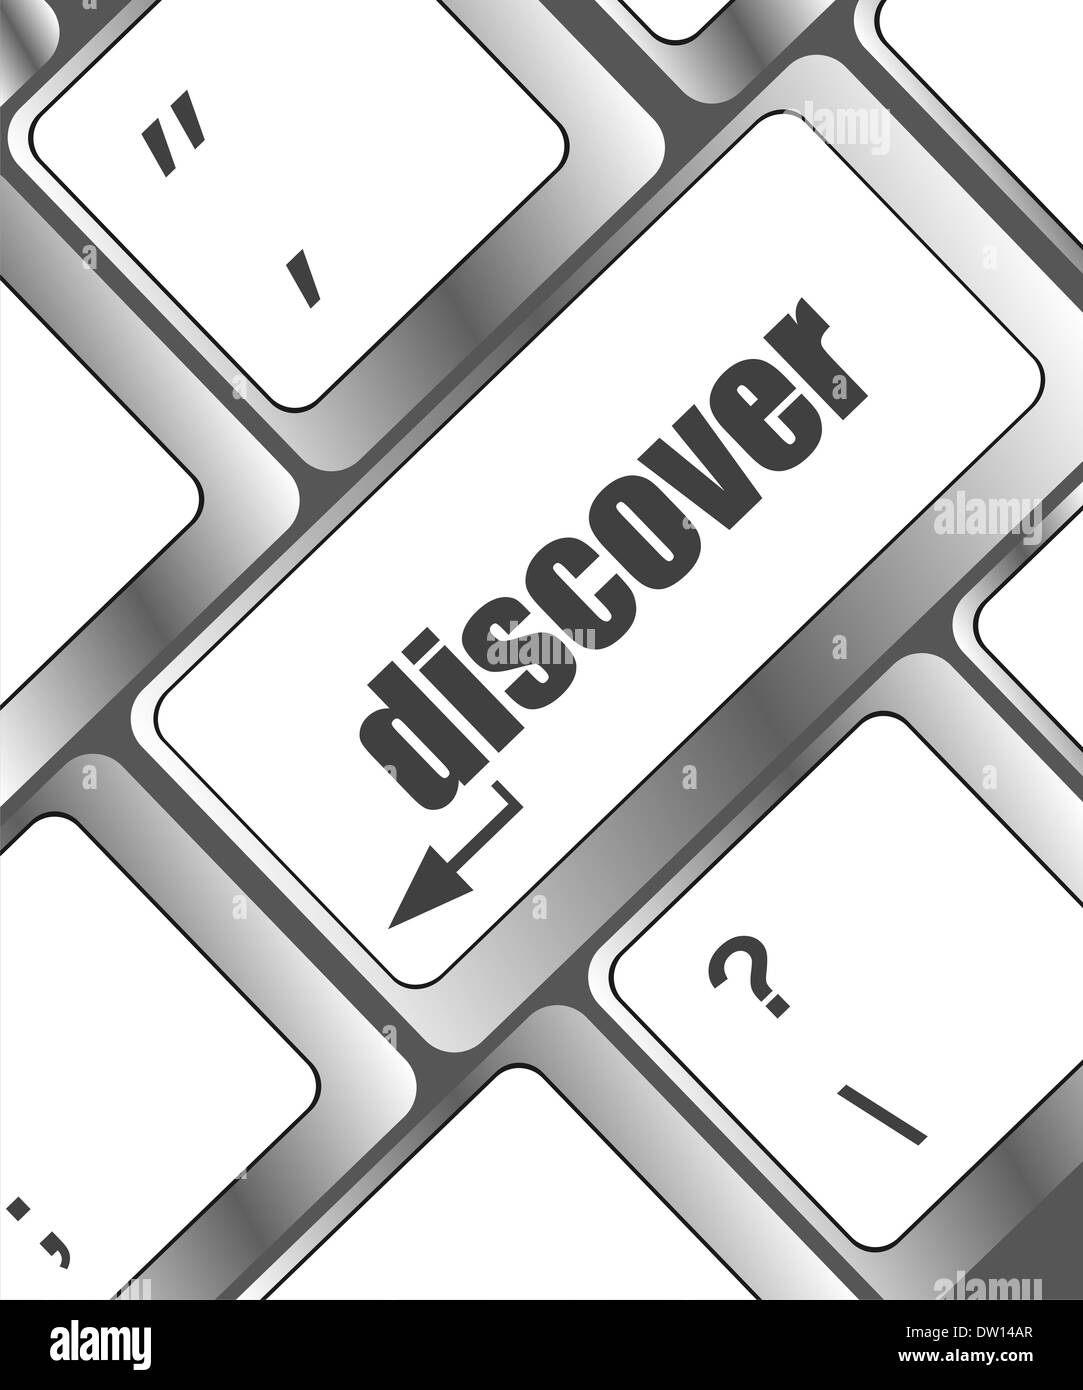 word discover on computer keyboard key Stock Photo